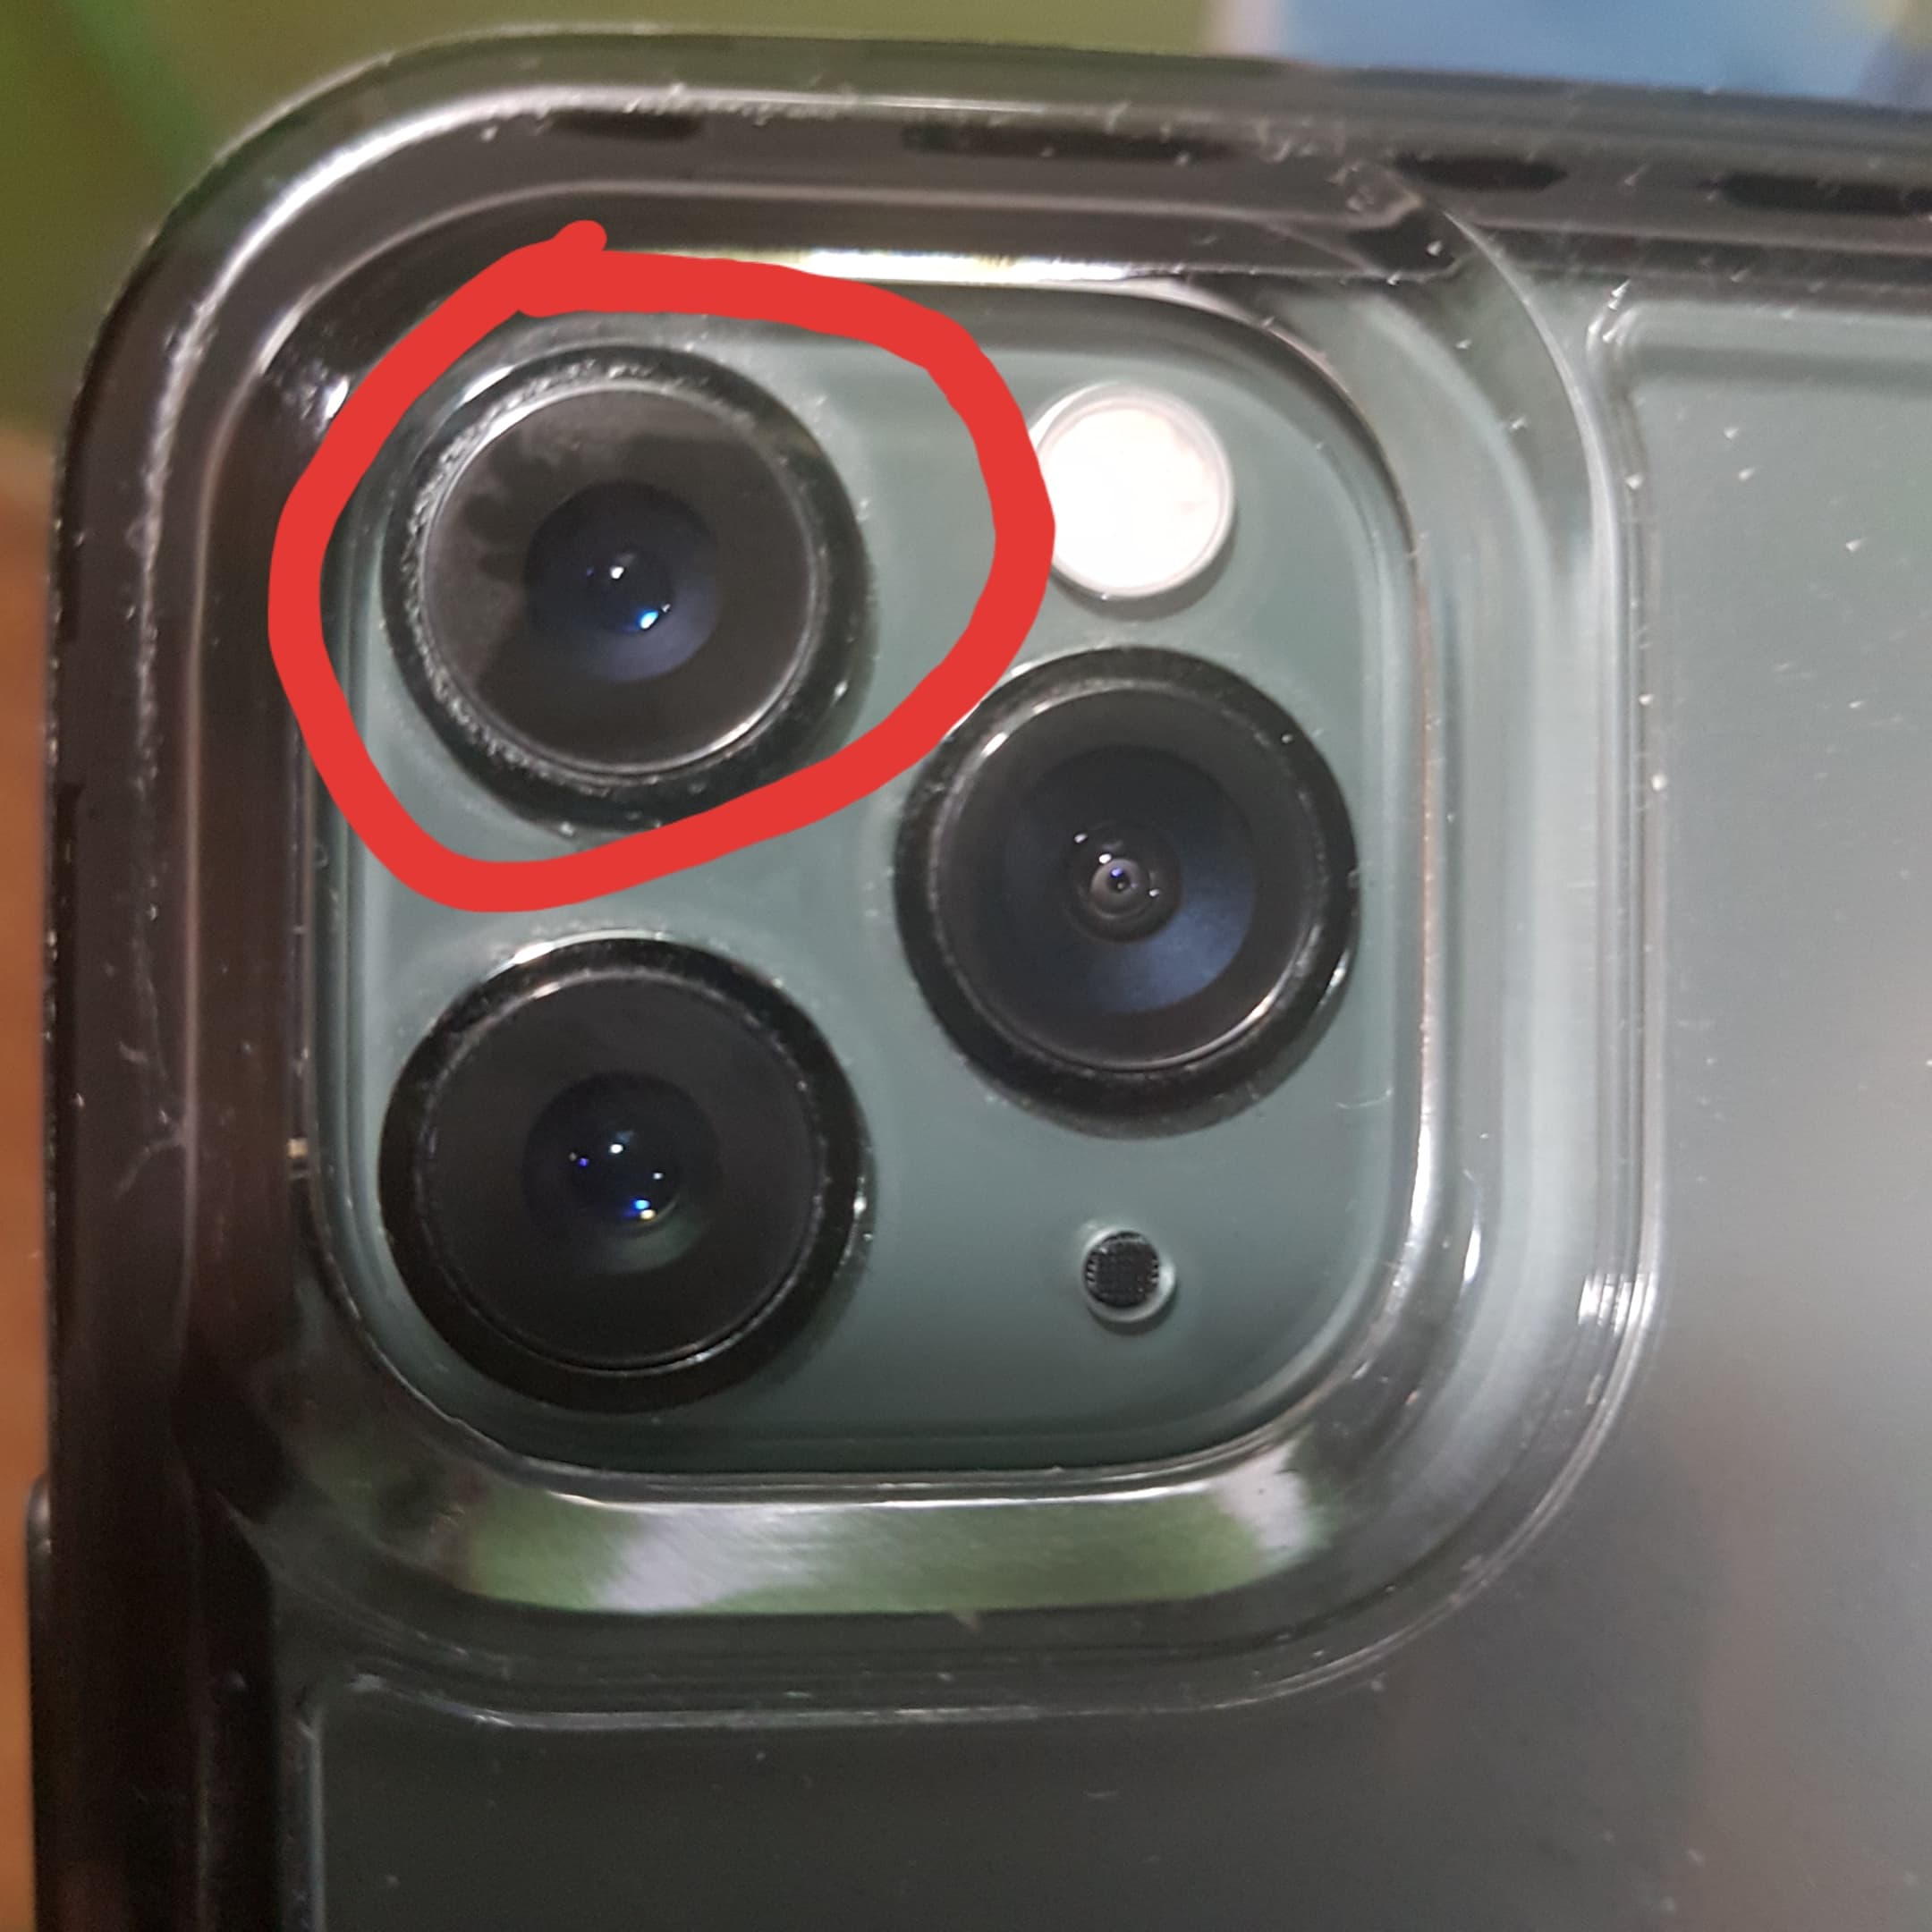 Can you scratch an iPhone lens?